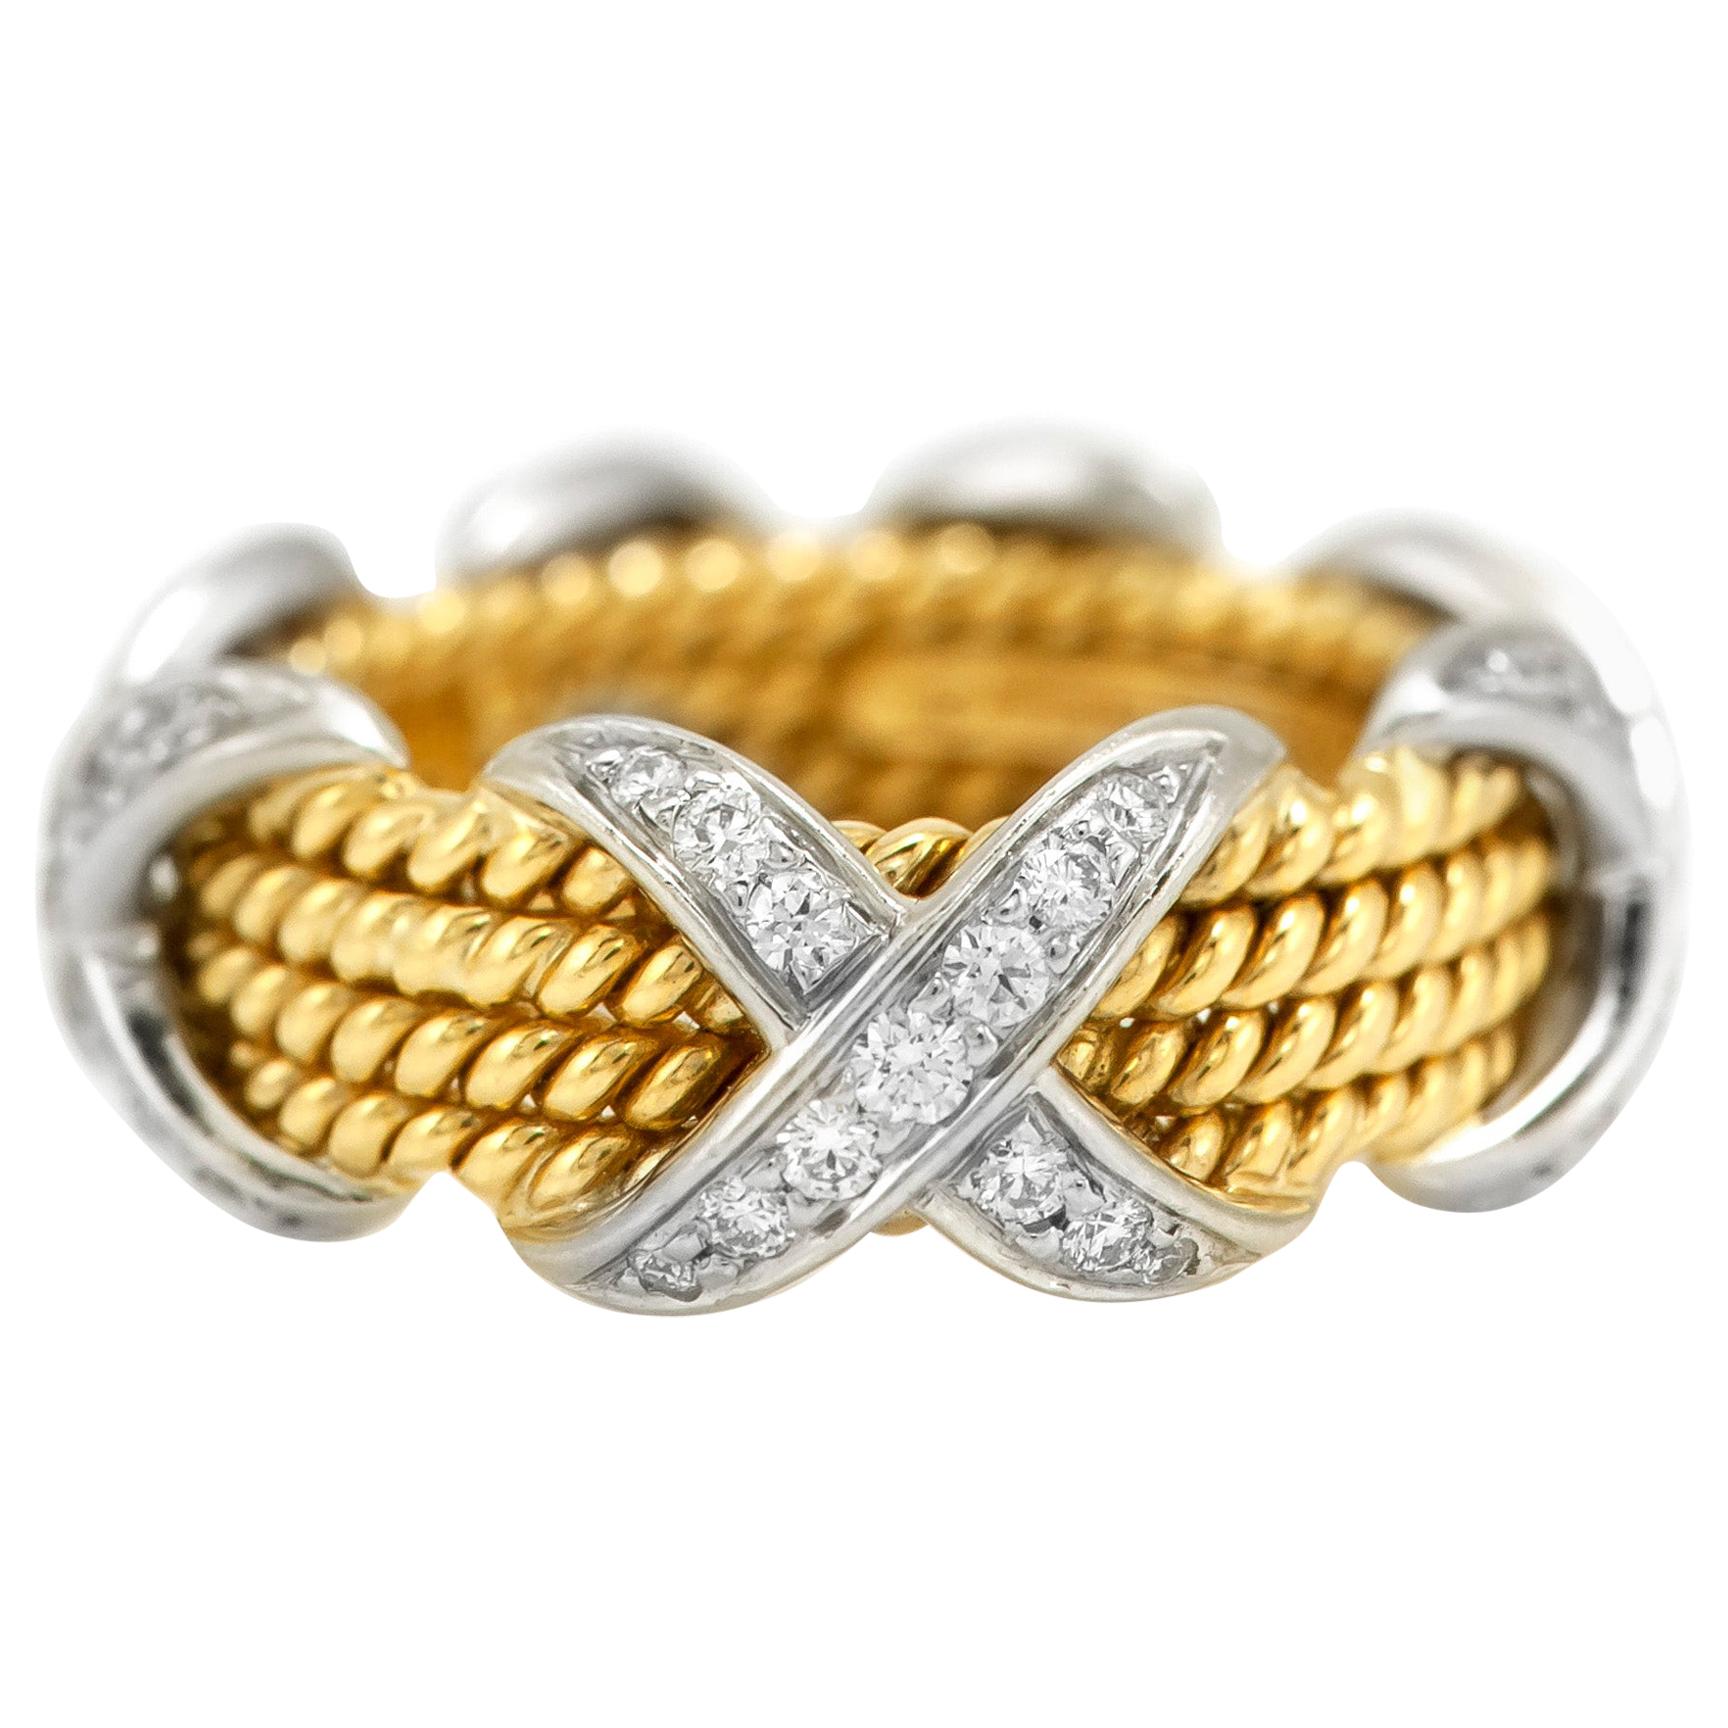 Tiffany & Co. Schlumberger Ring with Diamonds